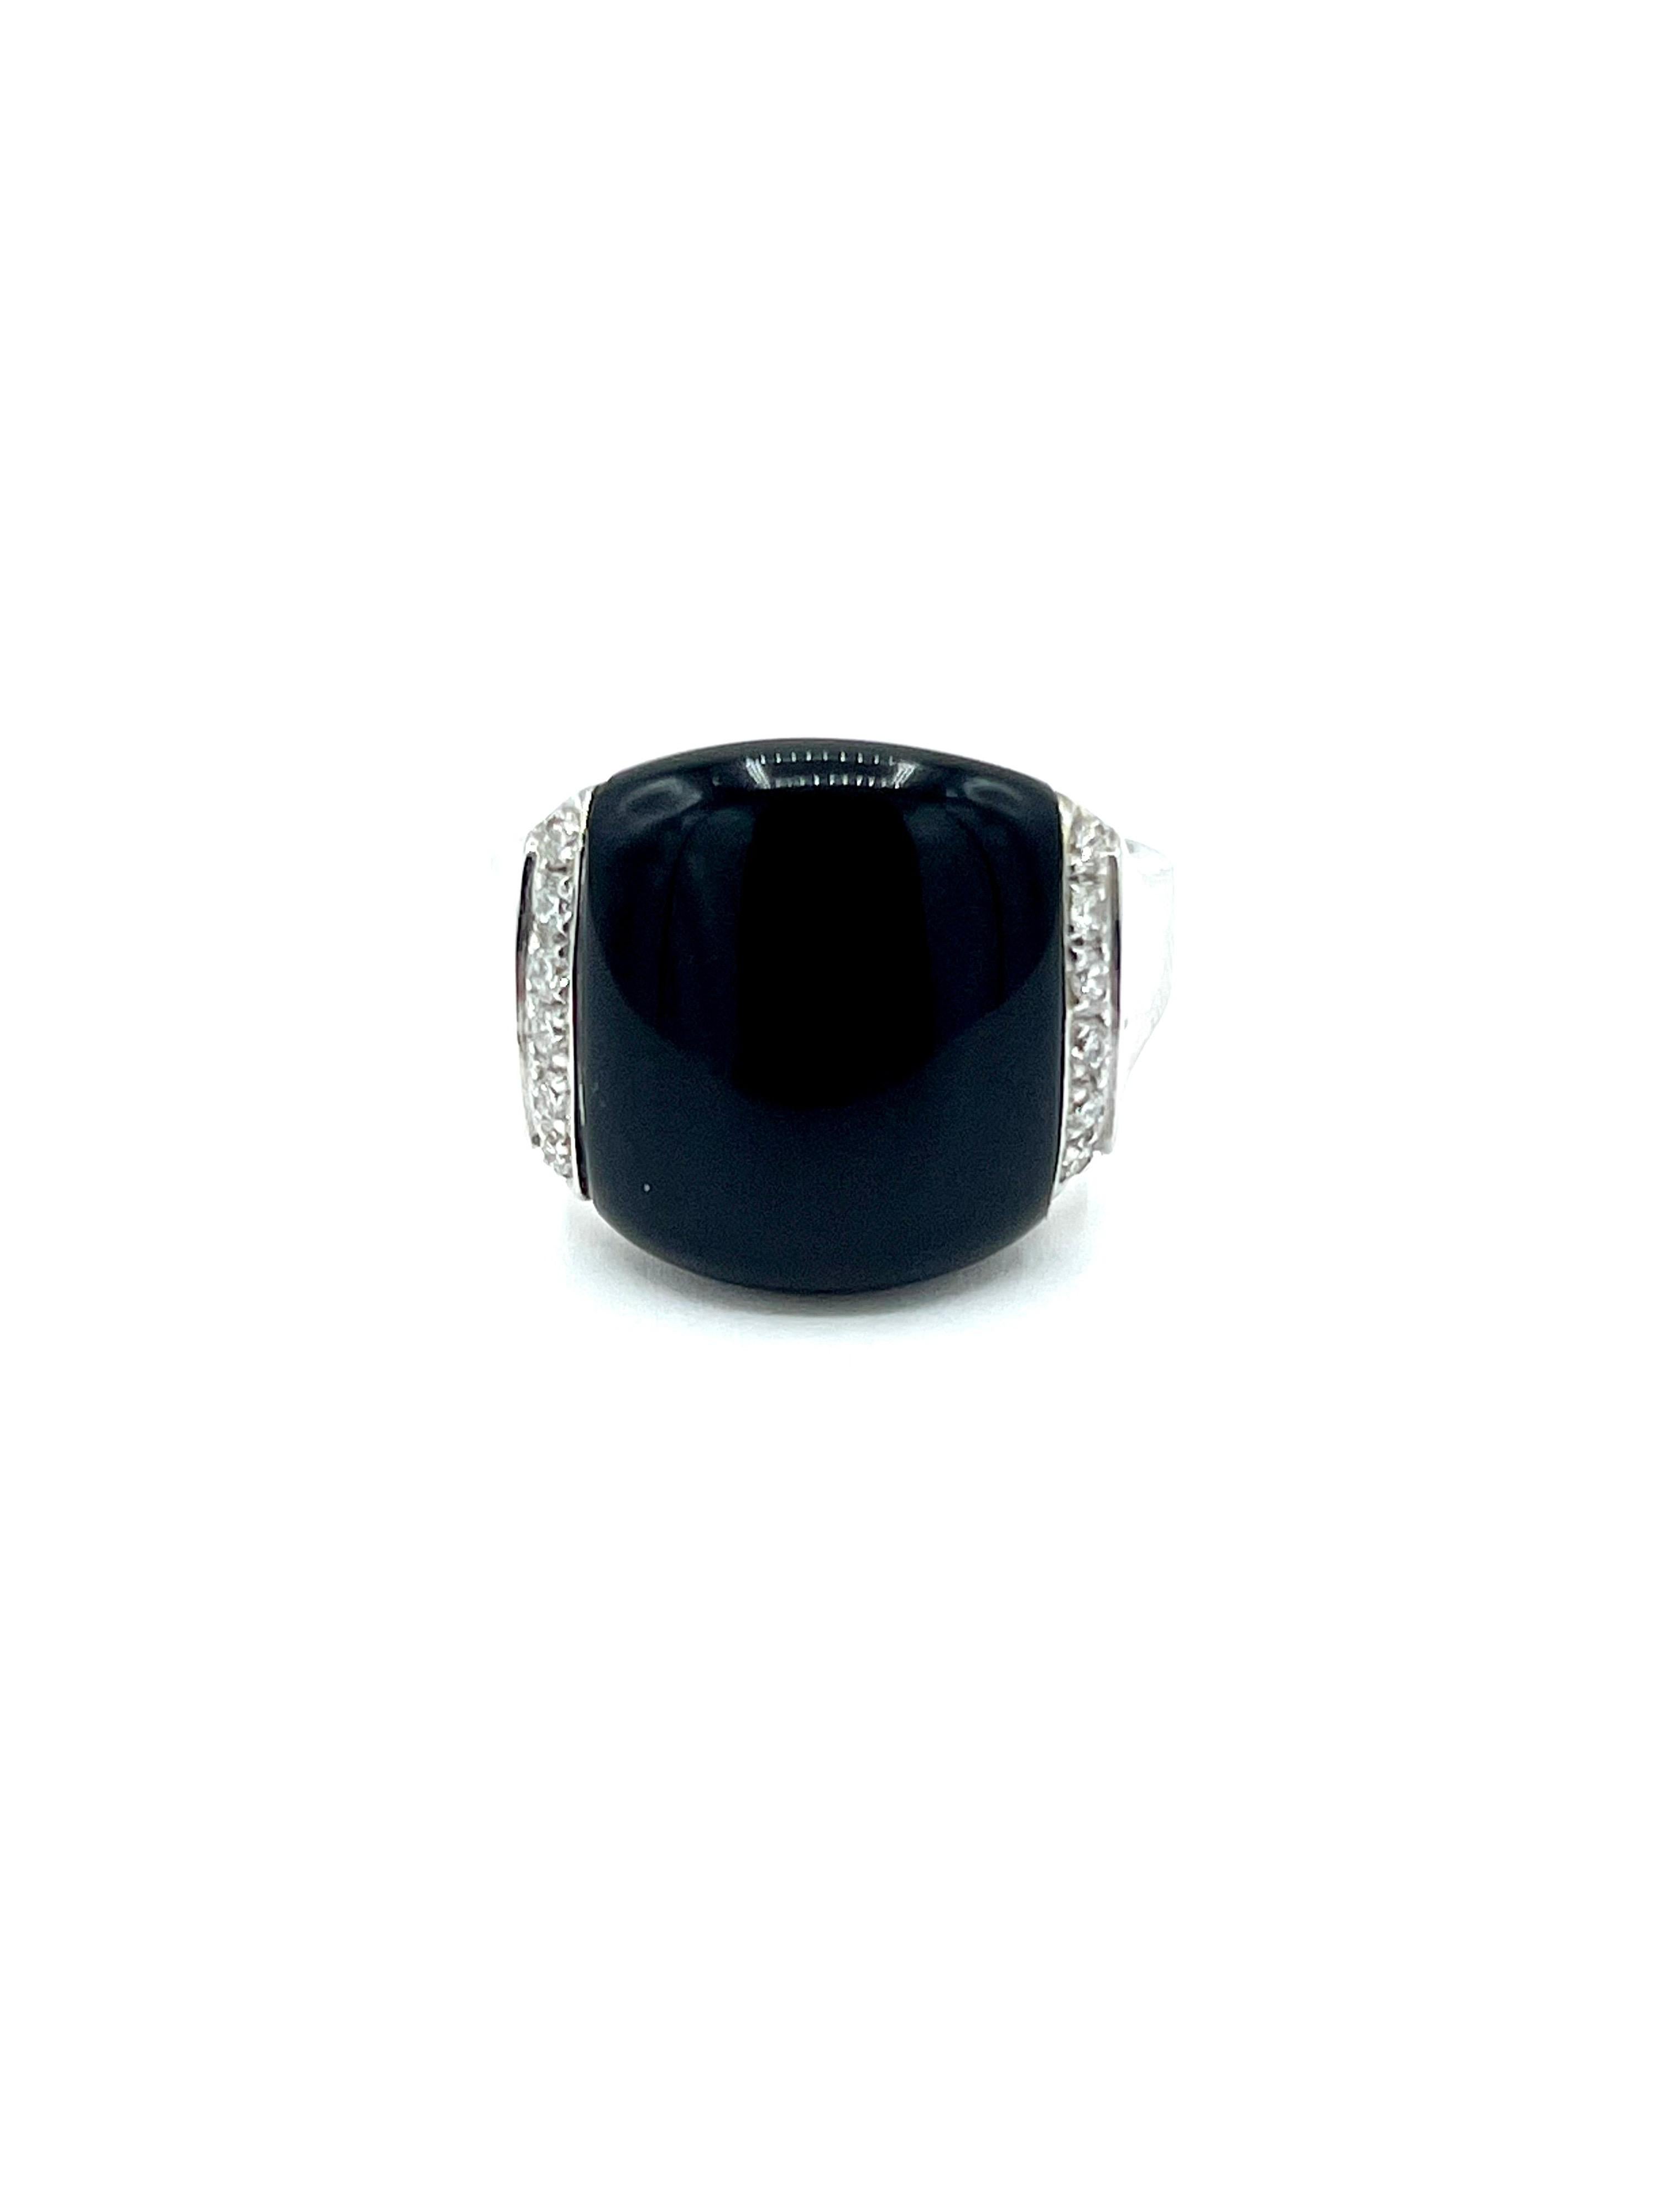 A great ring to wear for any occasion!  The cabochon cut Onyx is set with a single row of round brilliant Diamonds on each side of it, in 18K white gold.  The 12 diamonds have a total weight of 0.12 carats.  The shank of the ring tapers slightly